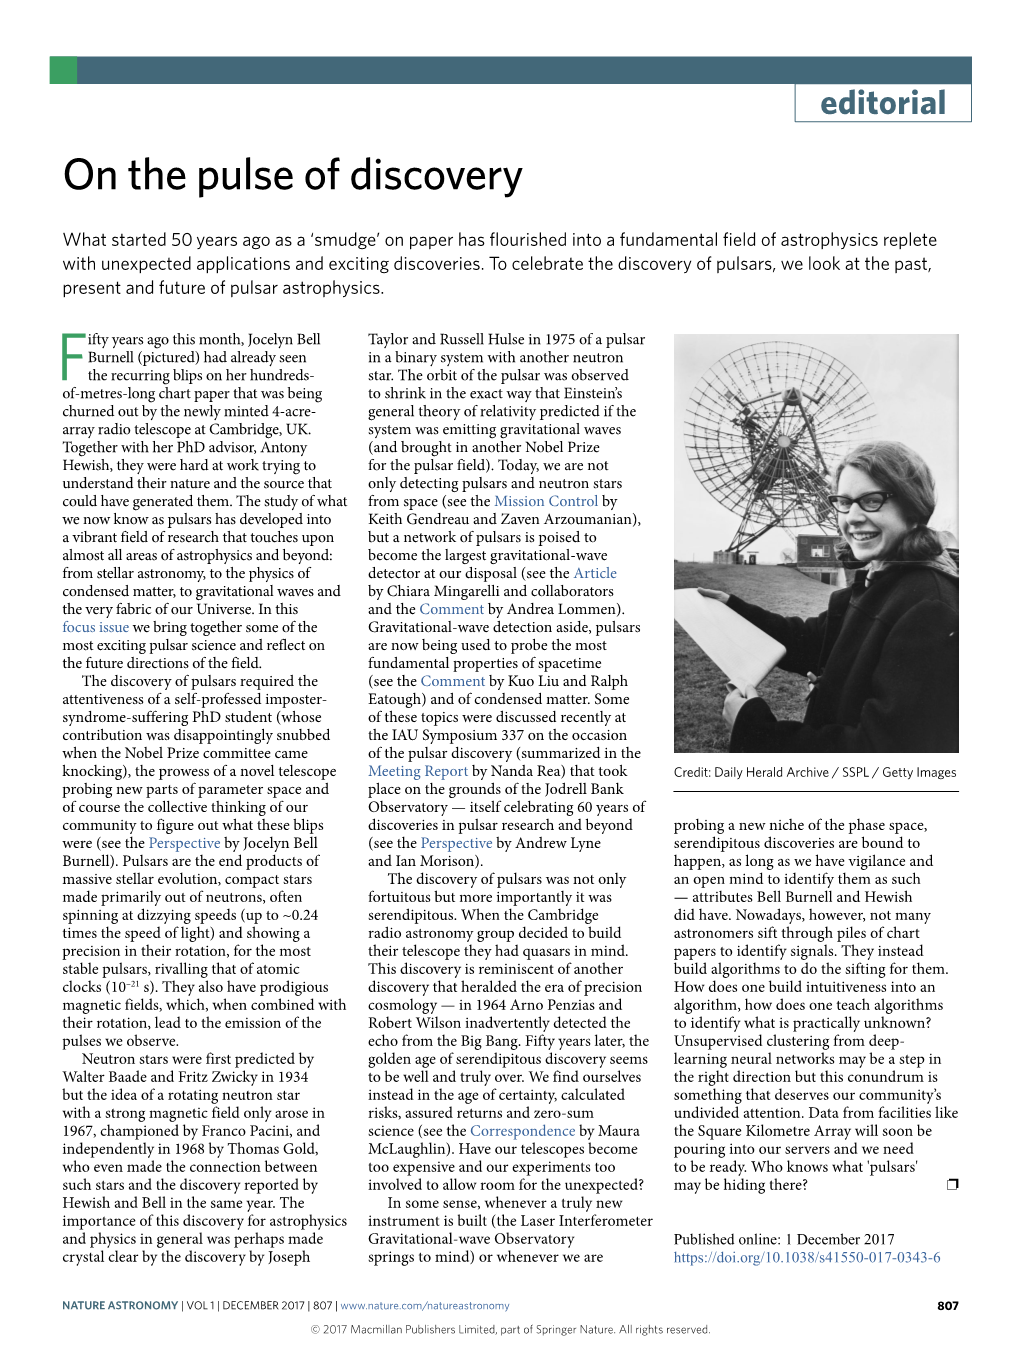 On the Pulse of Discovery